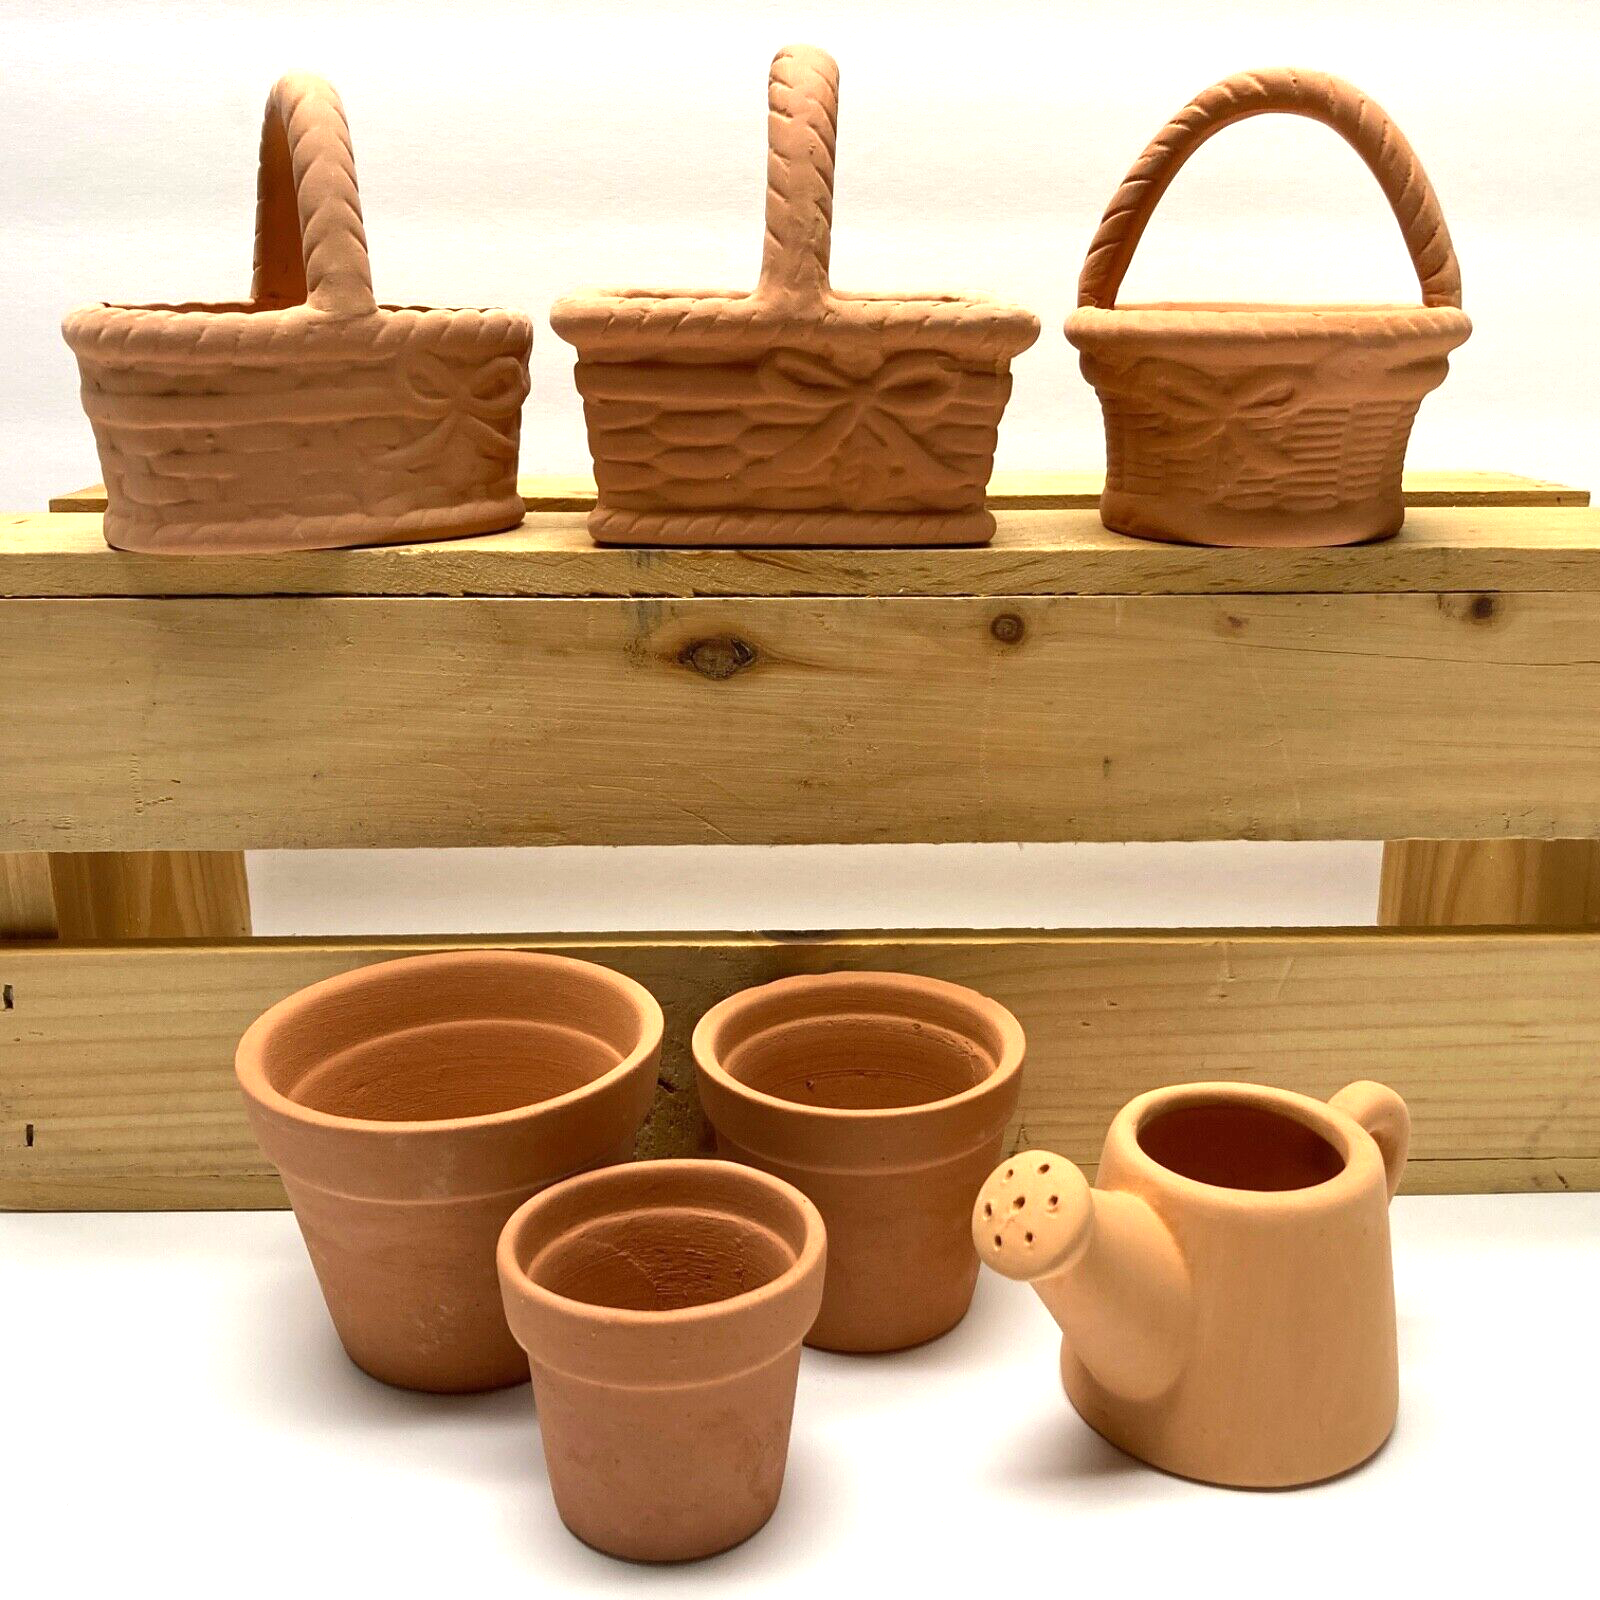 Lot of 7 NEW (flaws) Mini Clay Terracotta pots, baskets, water can home decor unmarked